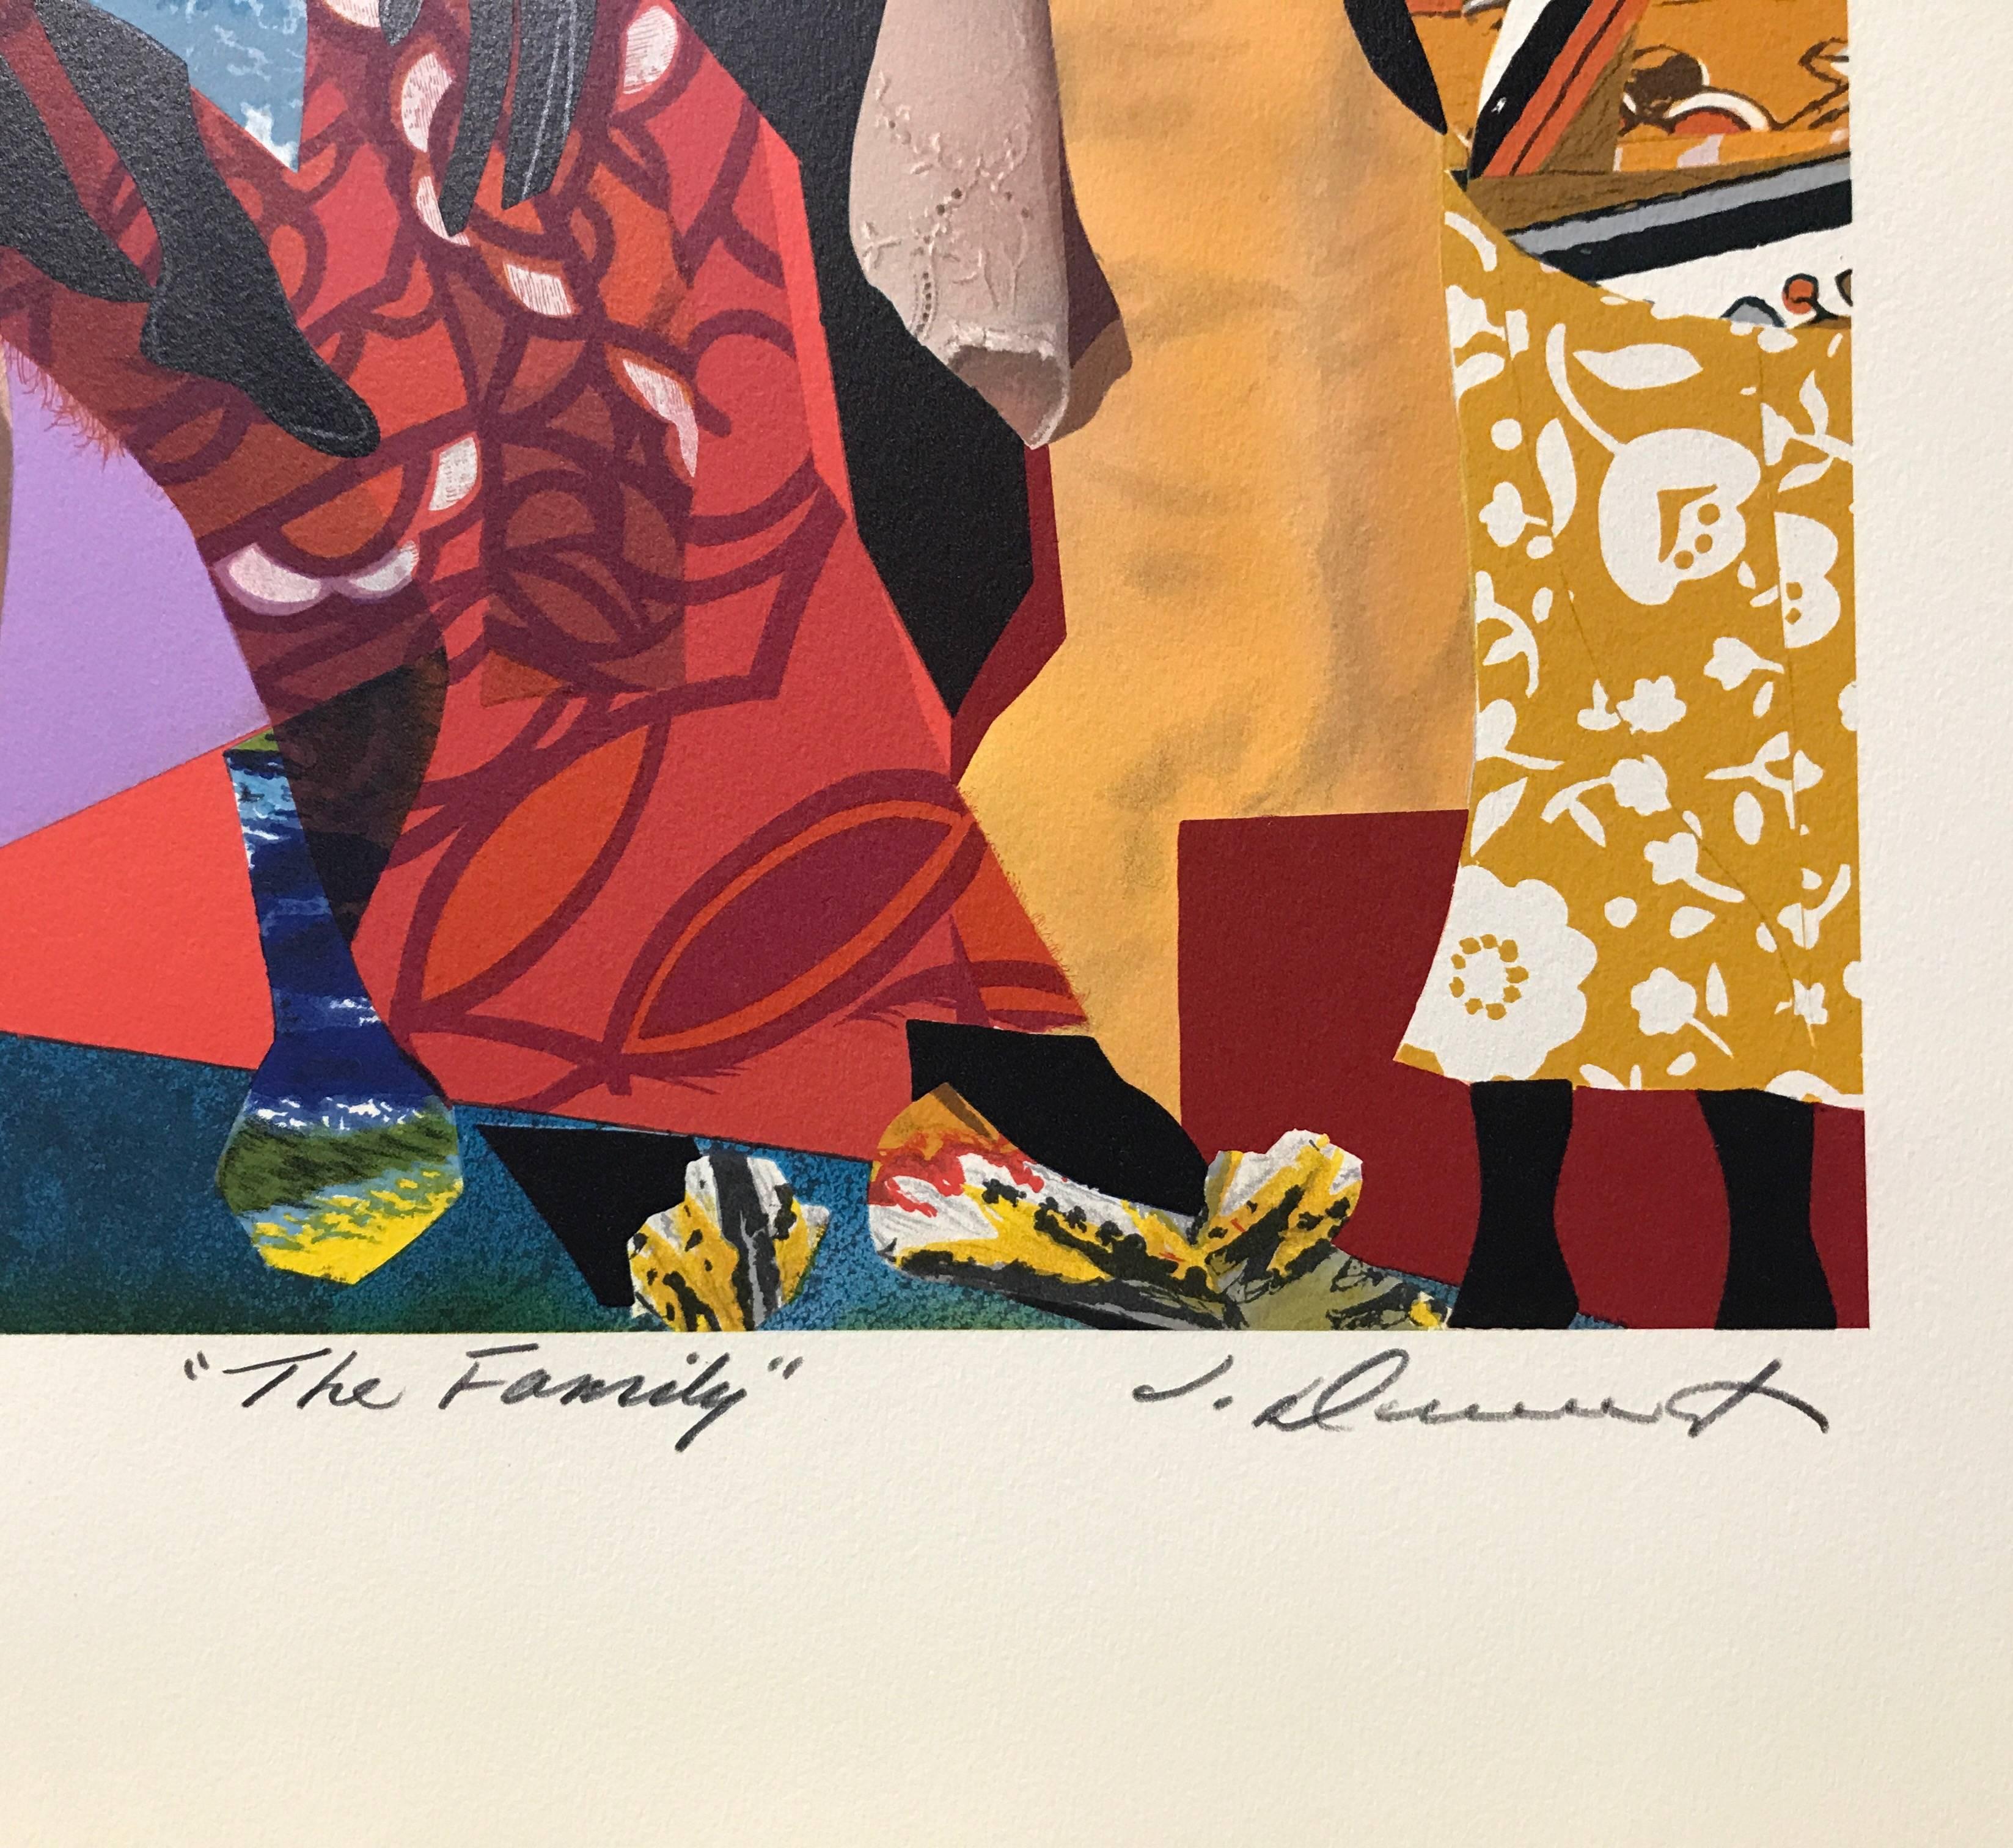 THE FAMILY is an original hand drawn, limited edition lithograph by the African American artist James Denmark, printed using hand lithography on Arches paper 100% acid free. Rich, vivid multi color composition comprised of colored papers, printed